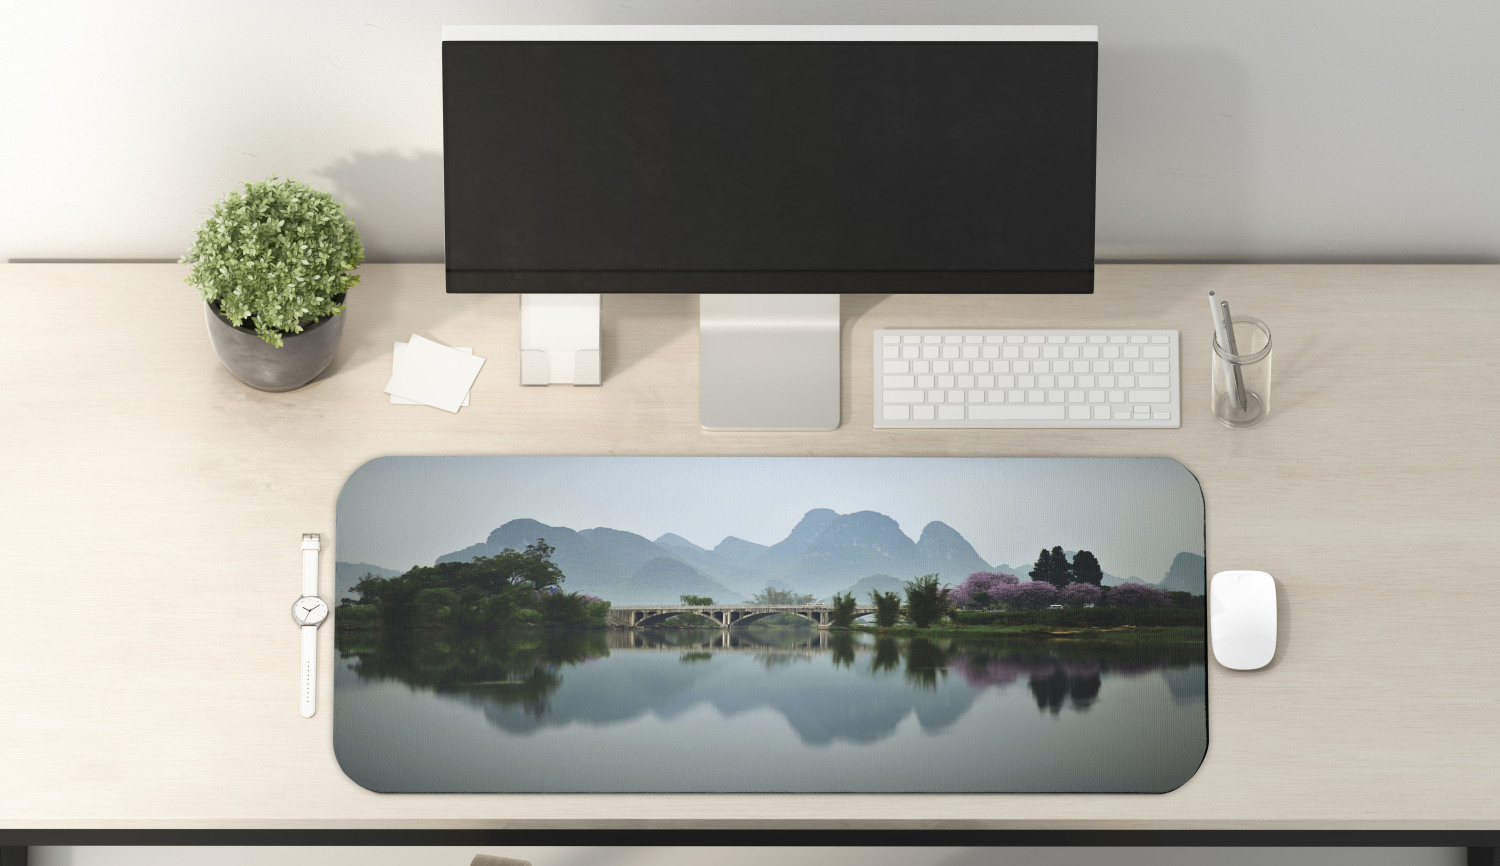 Japanese Computer Mouse Pad, Japanese National Park Bridge Reflections of the Mount on the Lake Scenery Photo, Rectangle Non-Slip Rubber Mousepad Large, 31" x 12", Multicolor, by Ambesonne - image 2 of 2